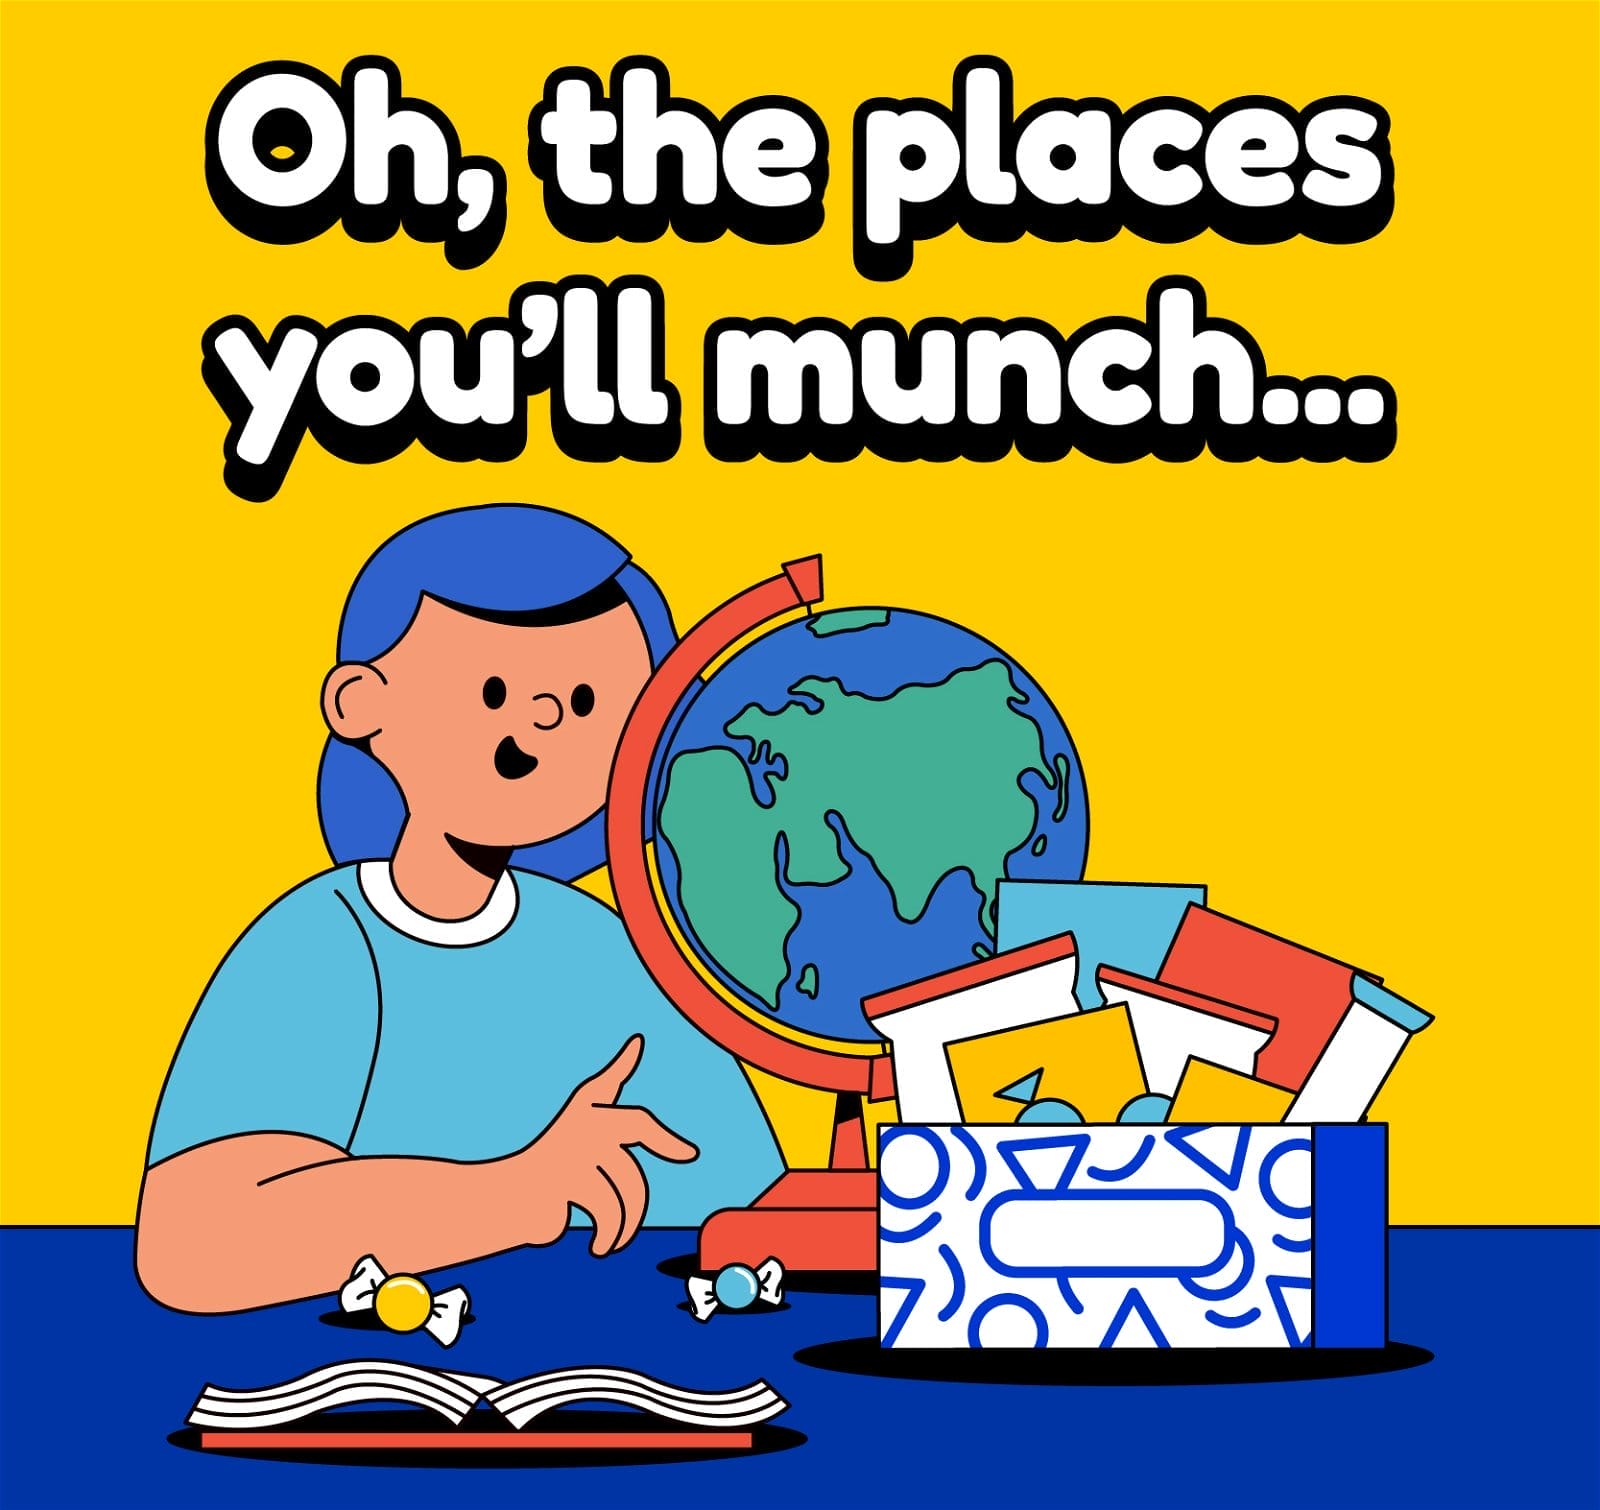 Oh, the places you'll munch...